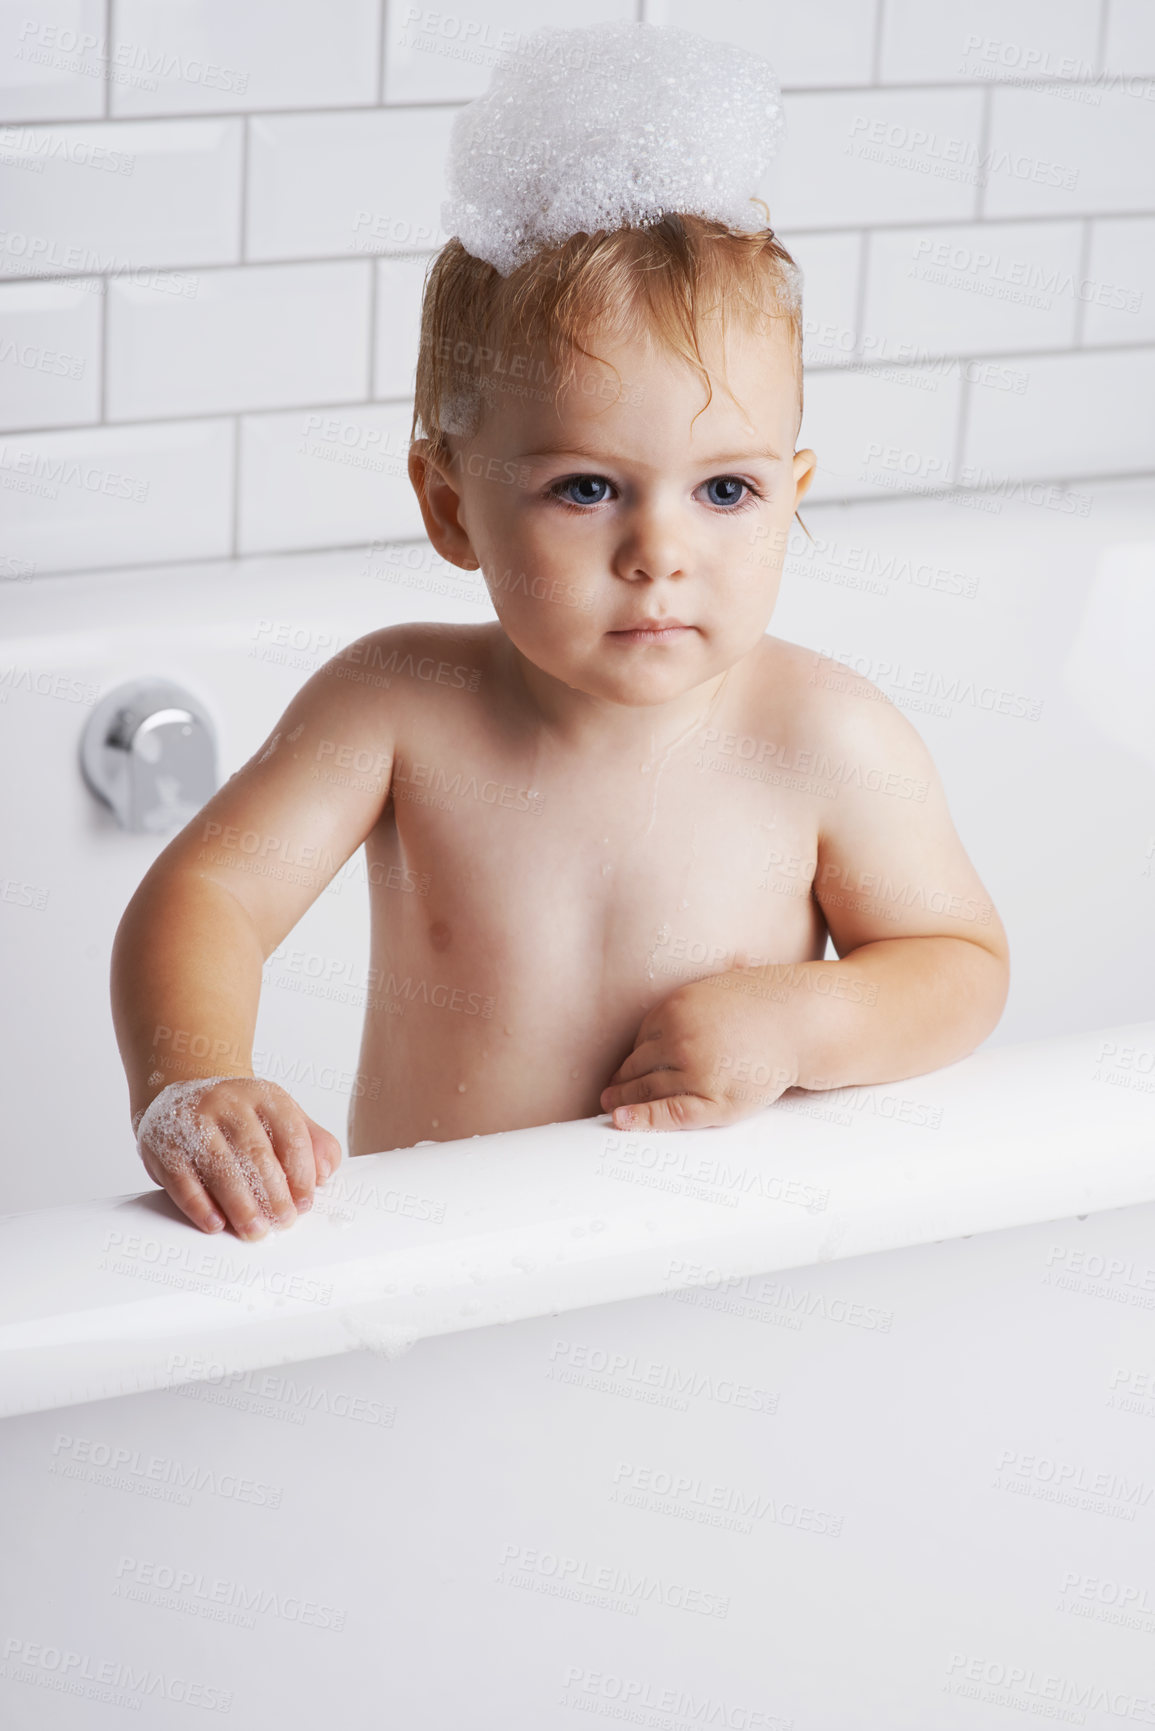 Buy stock photo An adorable baby boy standing in the bathtub